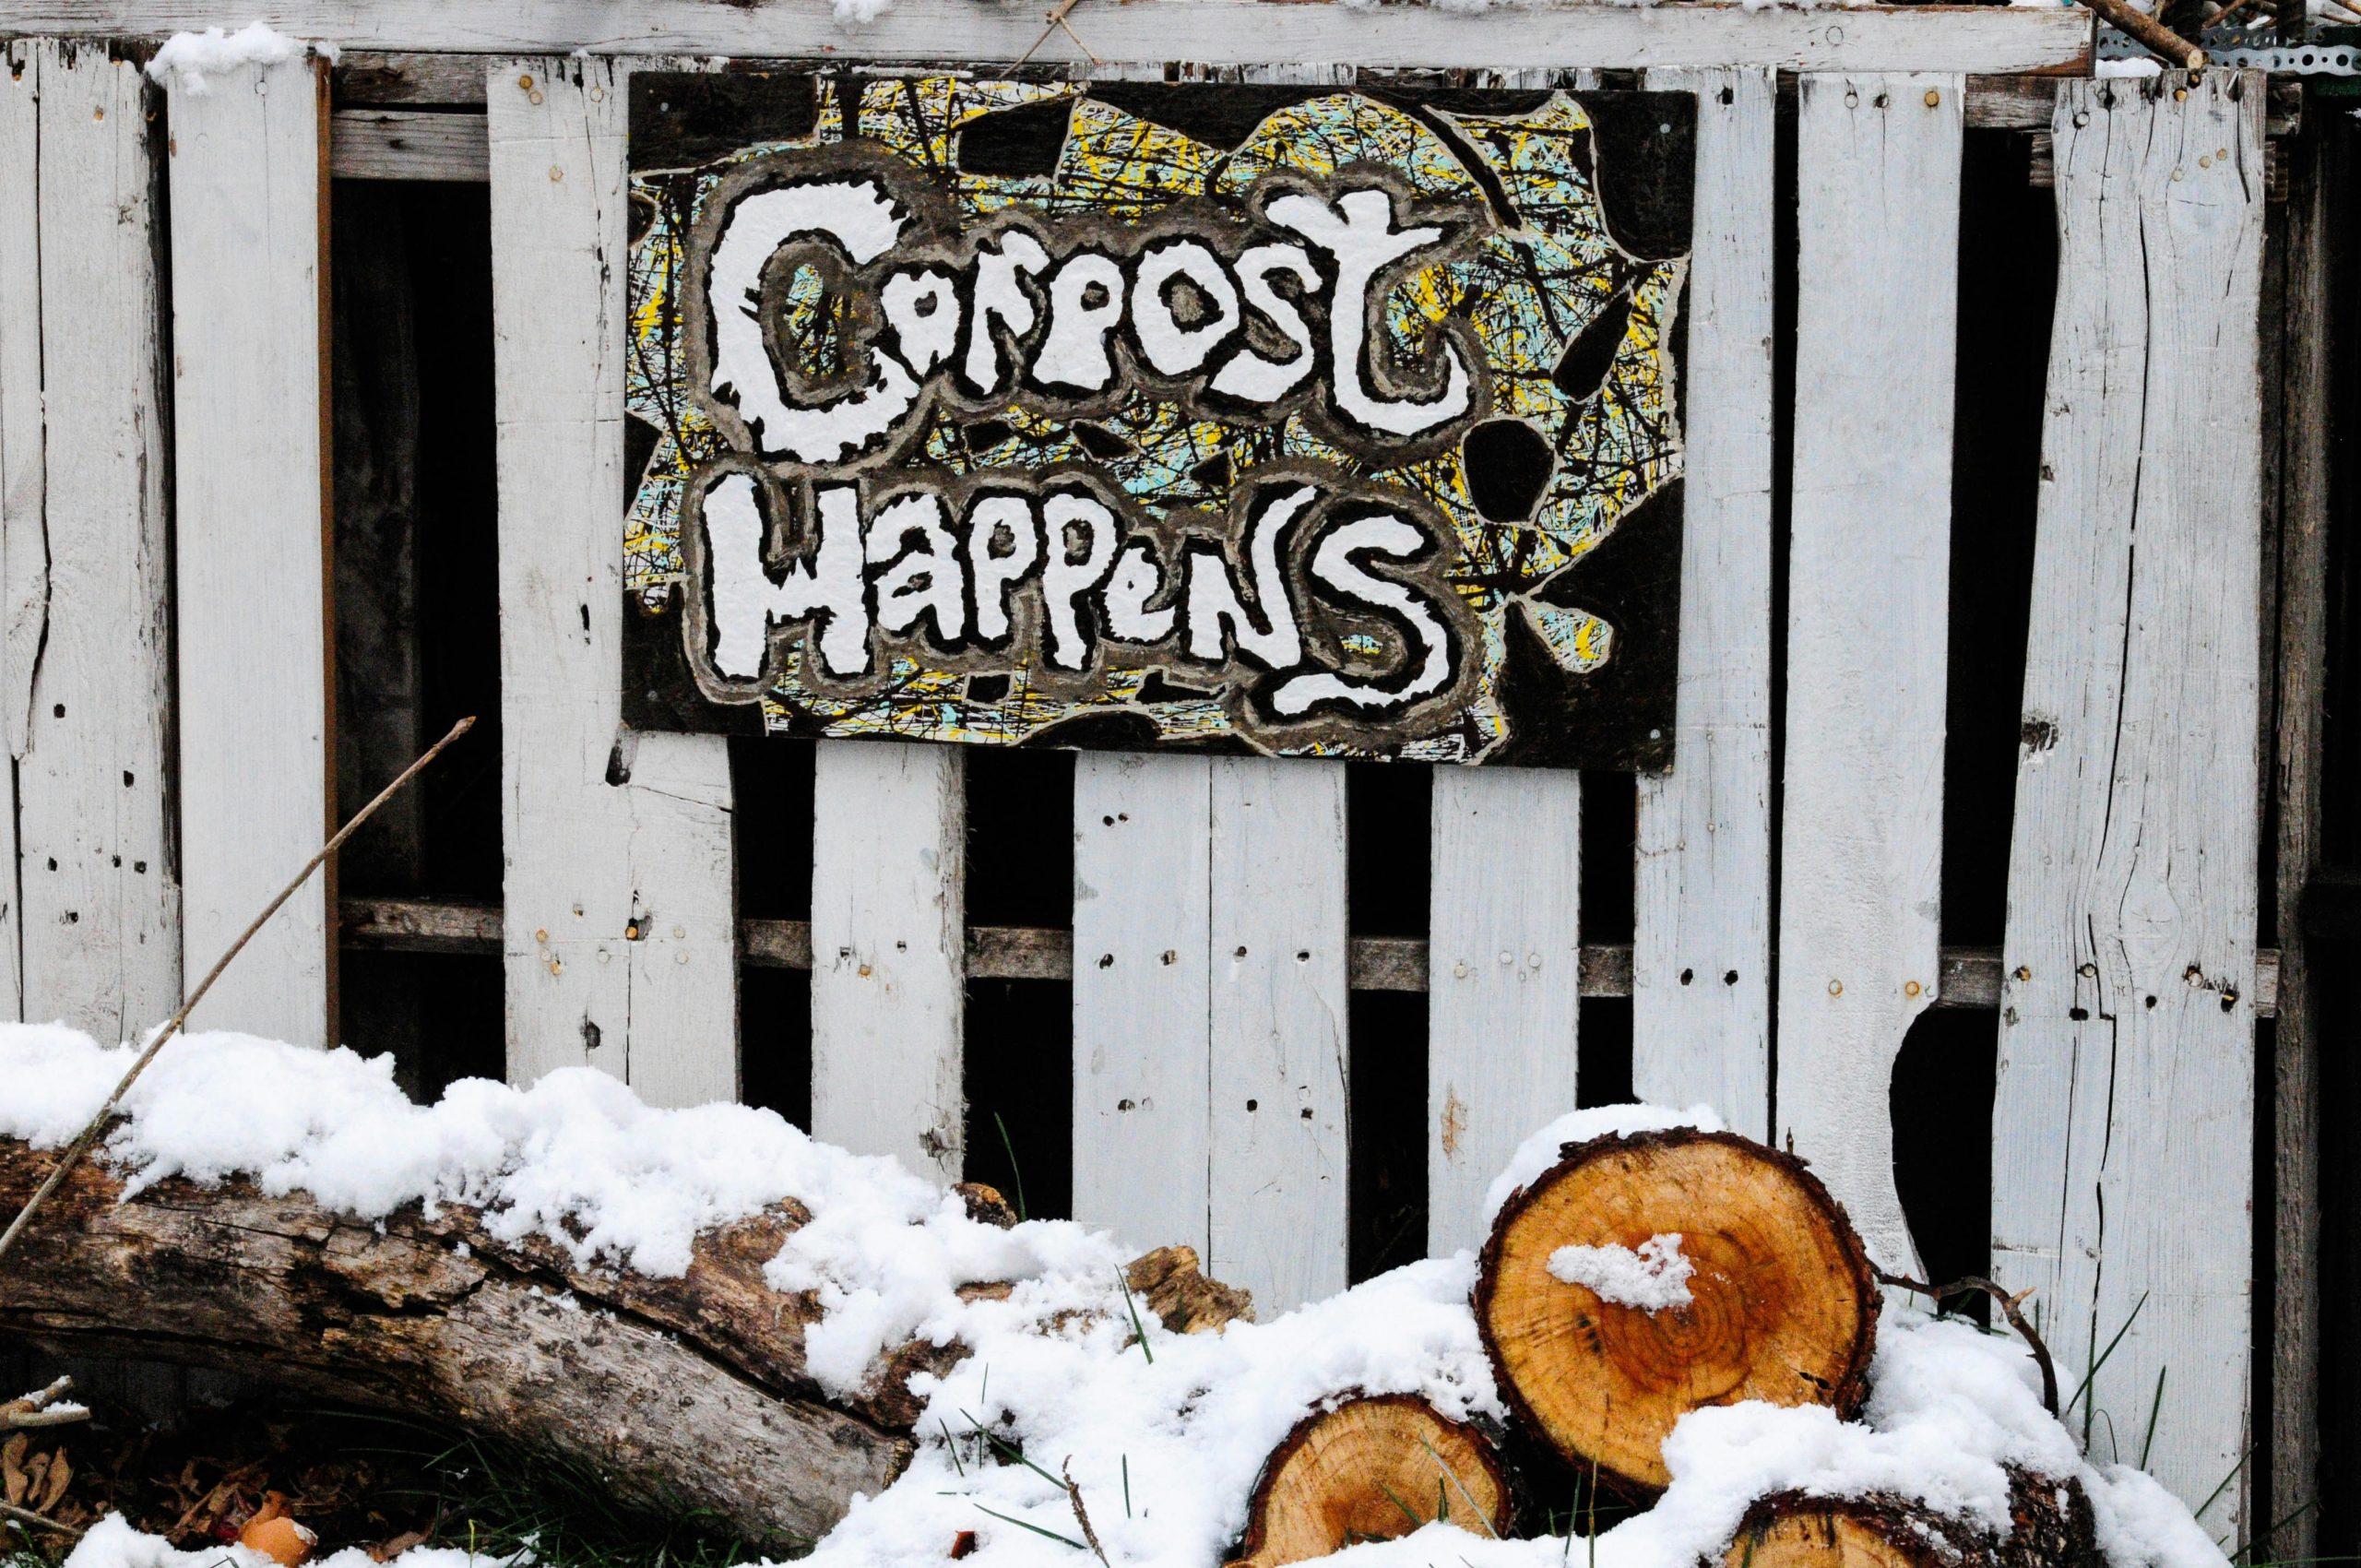 Can I Compost Paper And Cardboard?